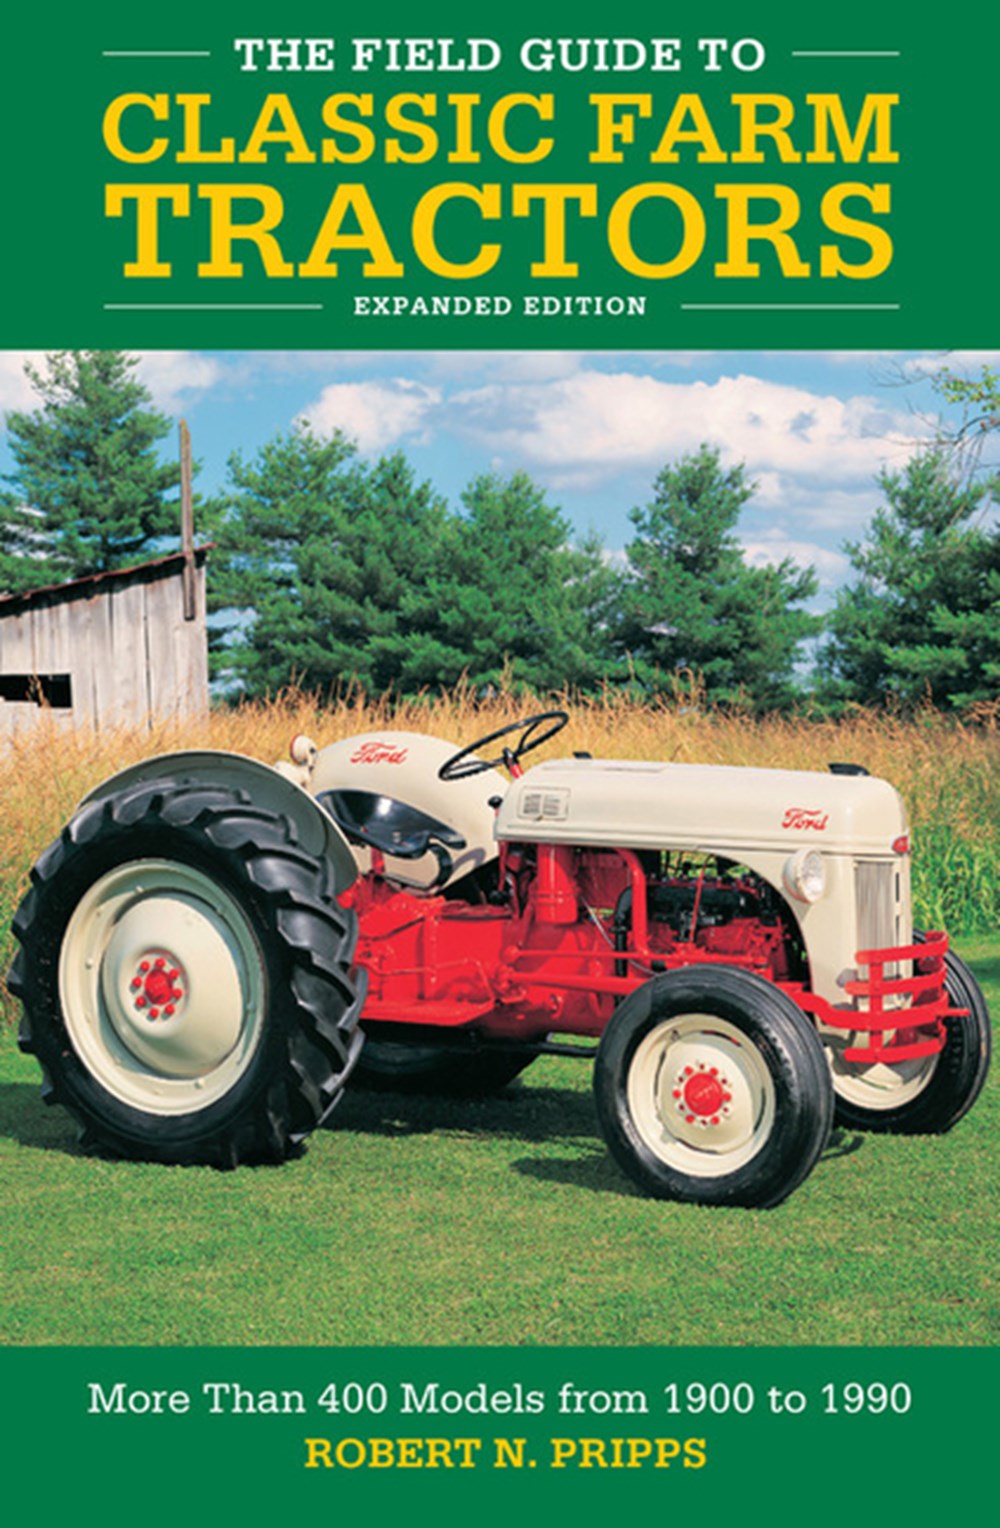 Field Guide to Classic Farm Tractors, Expanded Edition: More Than 400 Models from 1900 to 1990